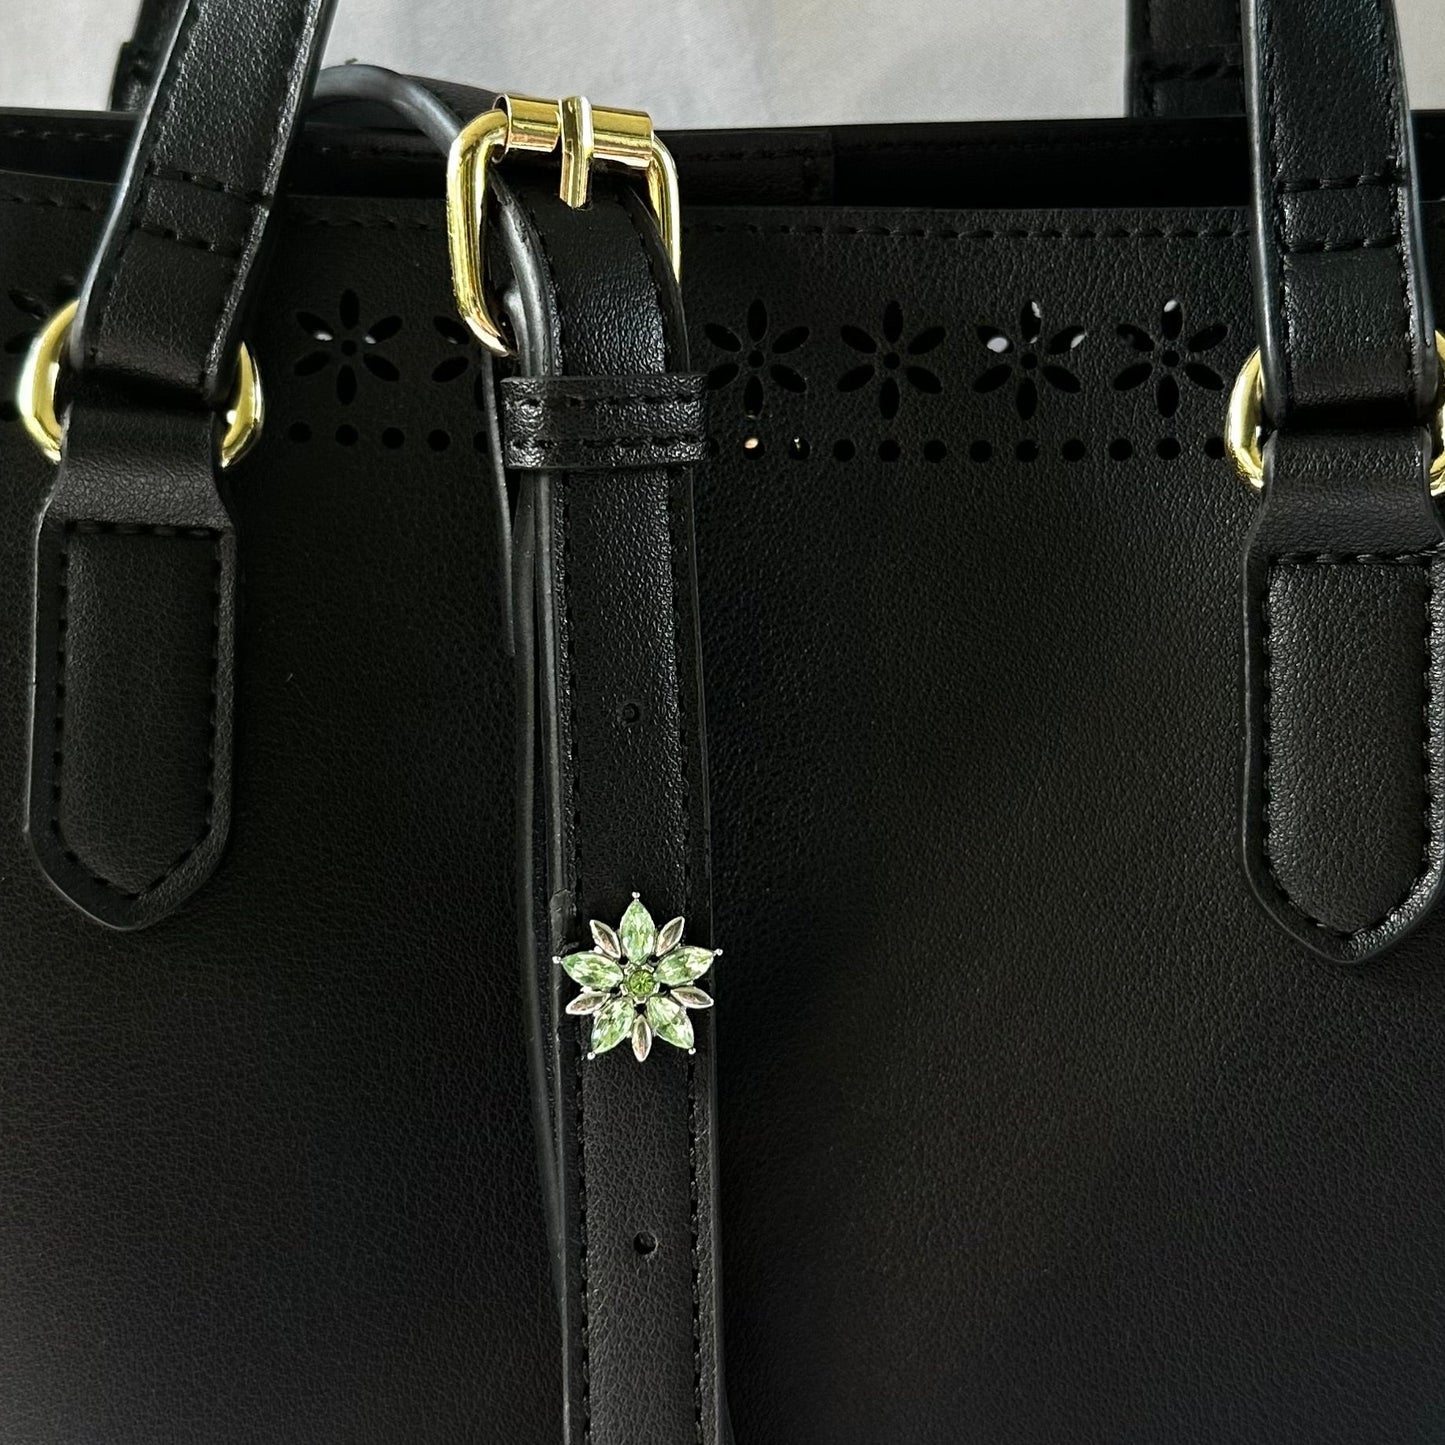 Green Flower Charm for Belts and Bags